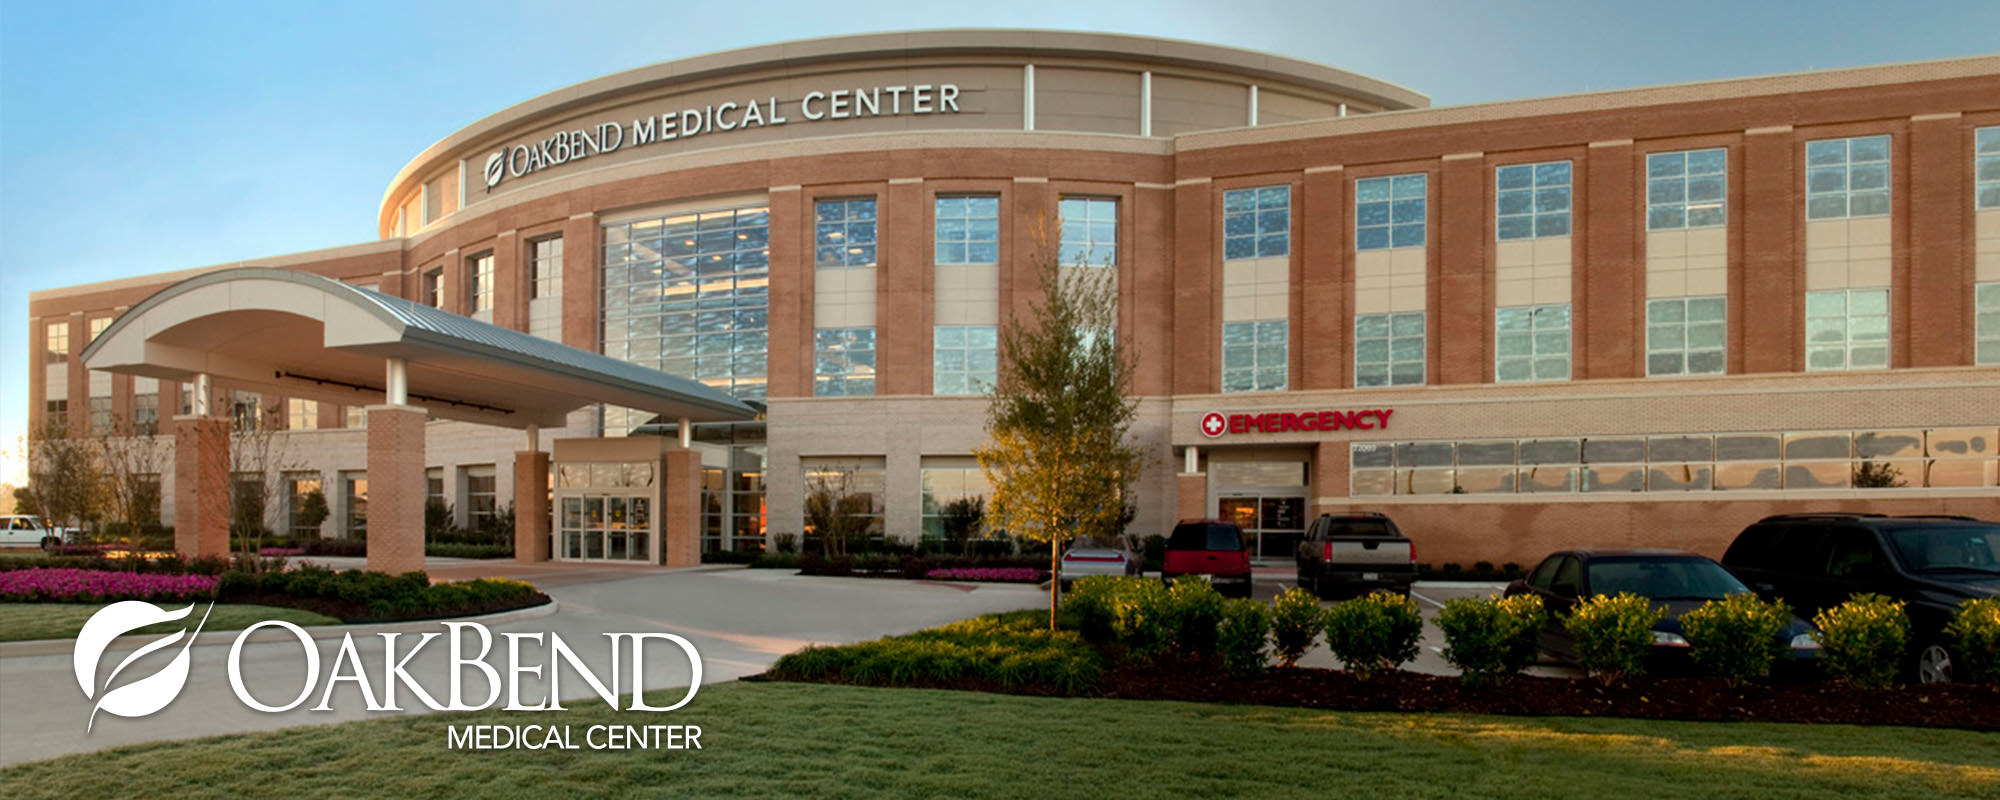 locations-oakbend-medical-center